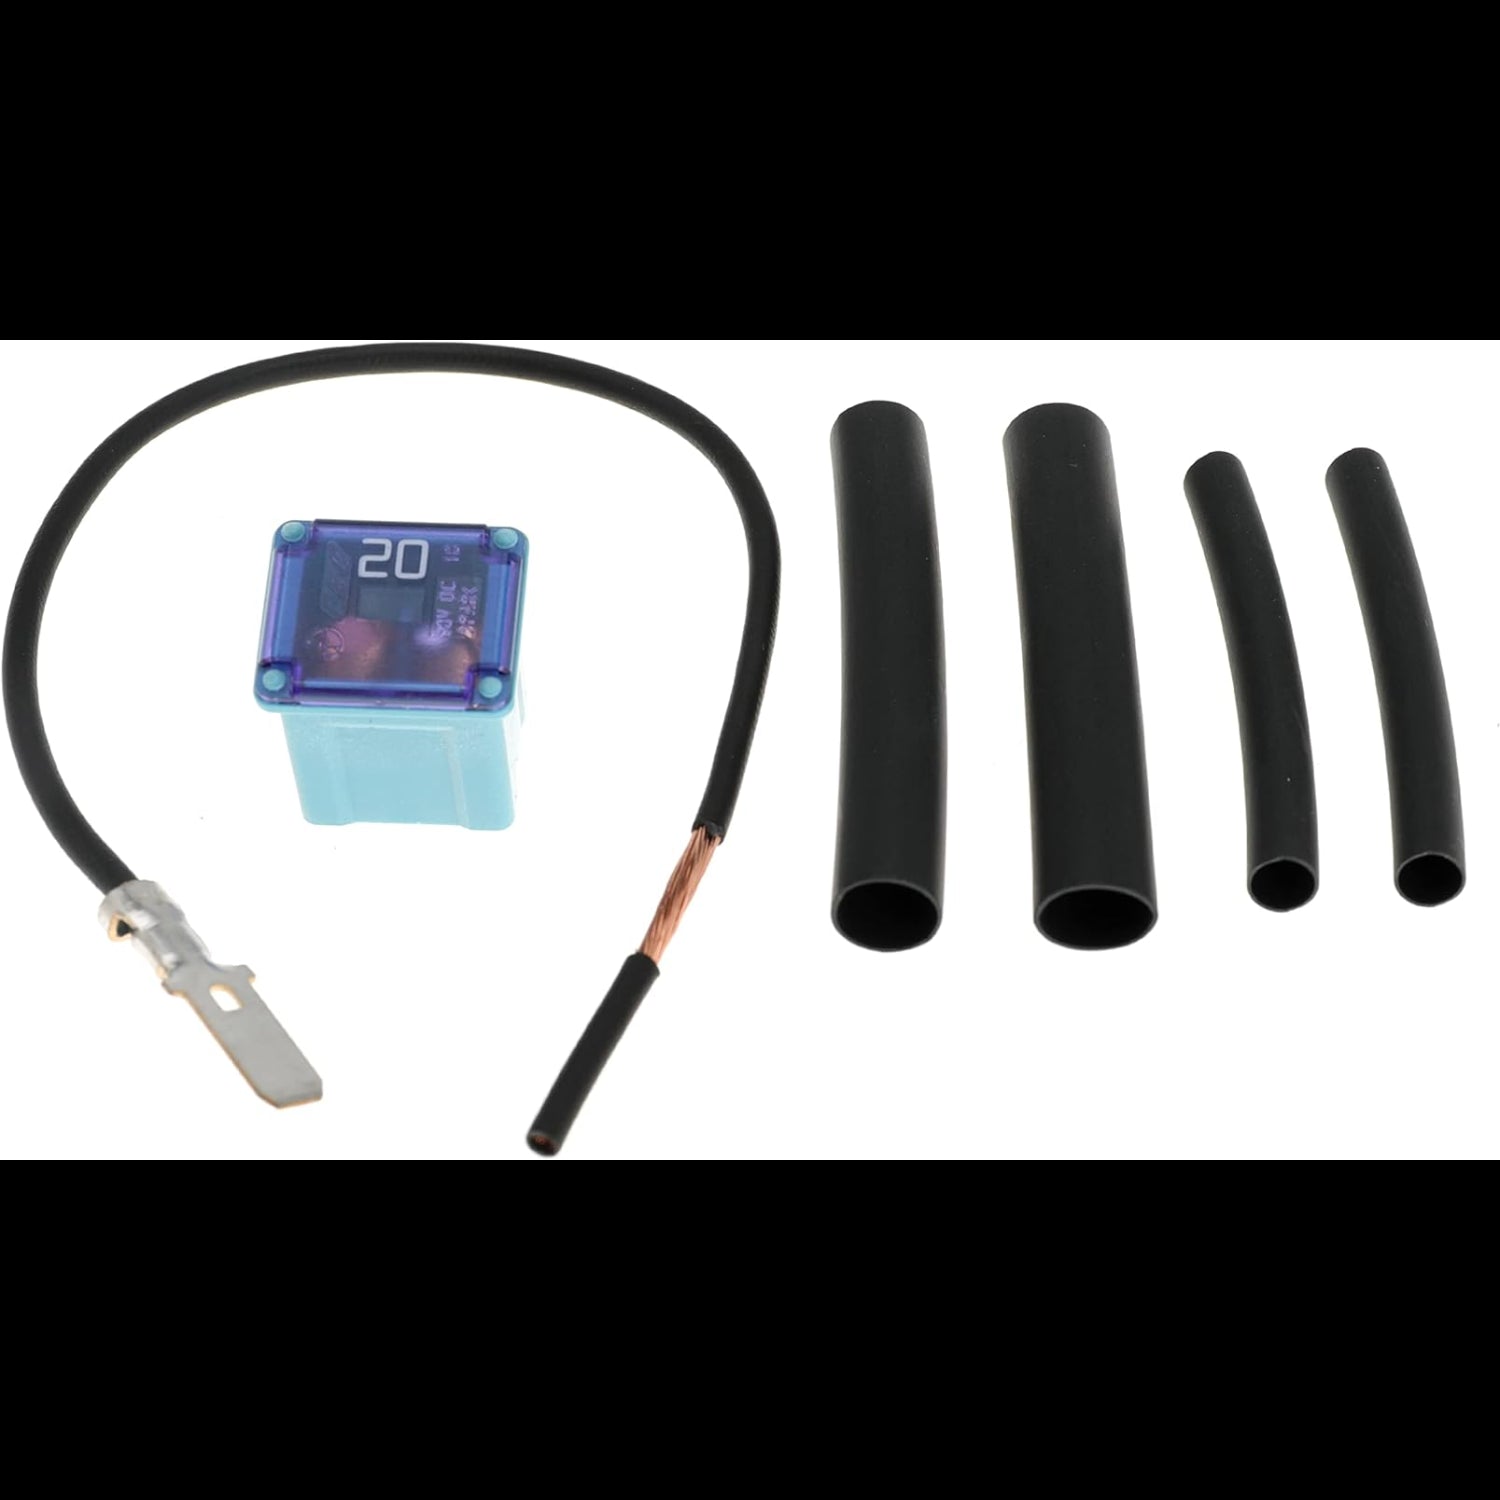 Fuel Pump Fuse Relocation Terminal Kit with 2 Extra Tubes for Ford F150 2009-2014 Replaces 926-034 EL3Z14293A 926034